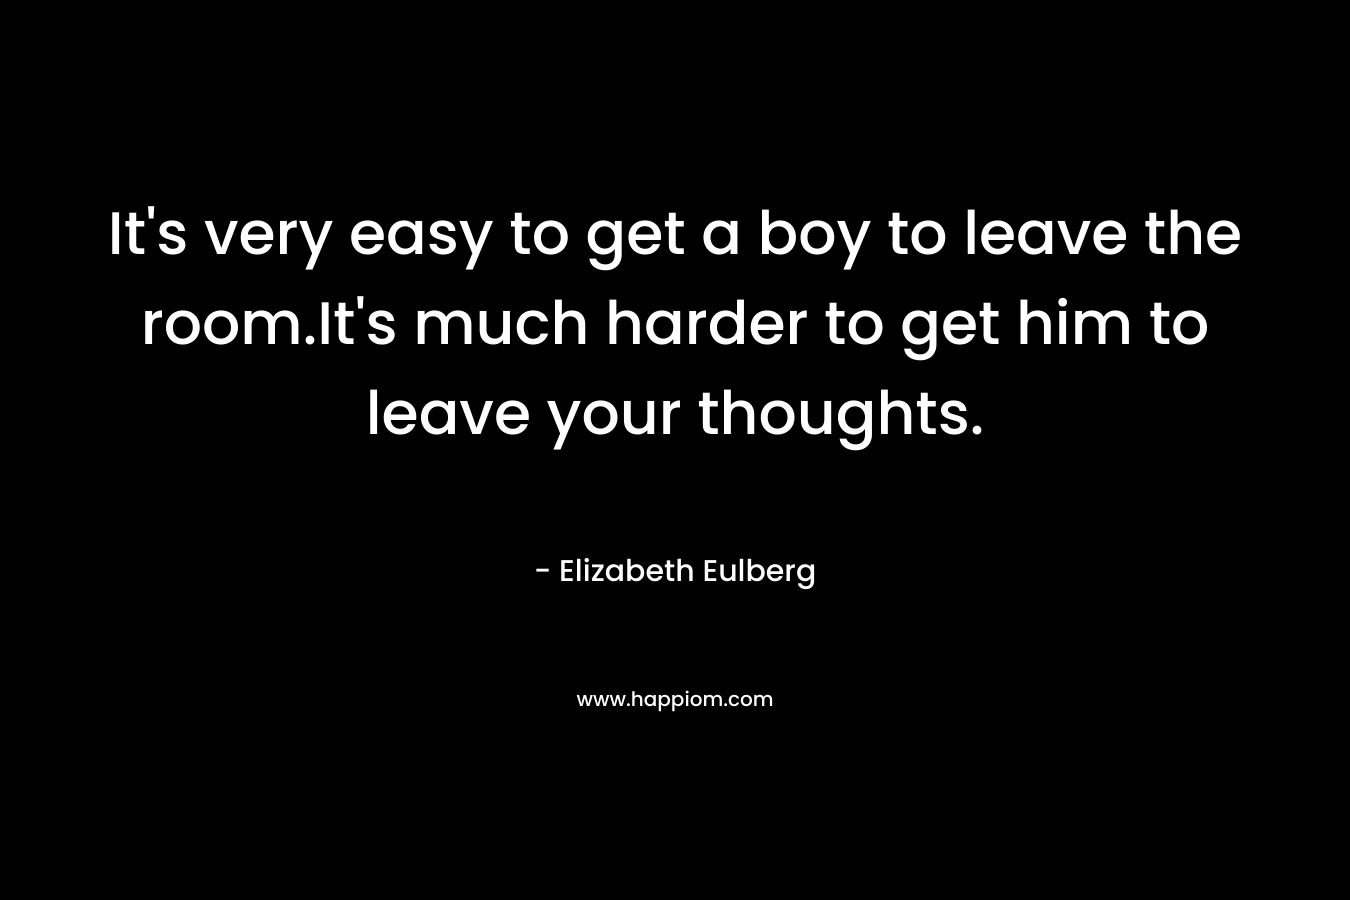 It’s very easy to get a boy to leave the room.It’s much harder to get him to leave your thoughts. – Elizabeth Eulberg